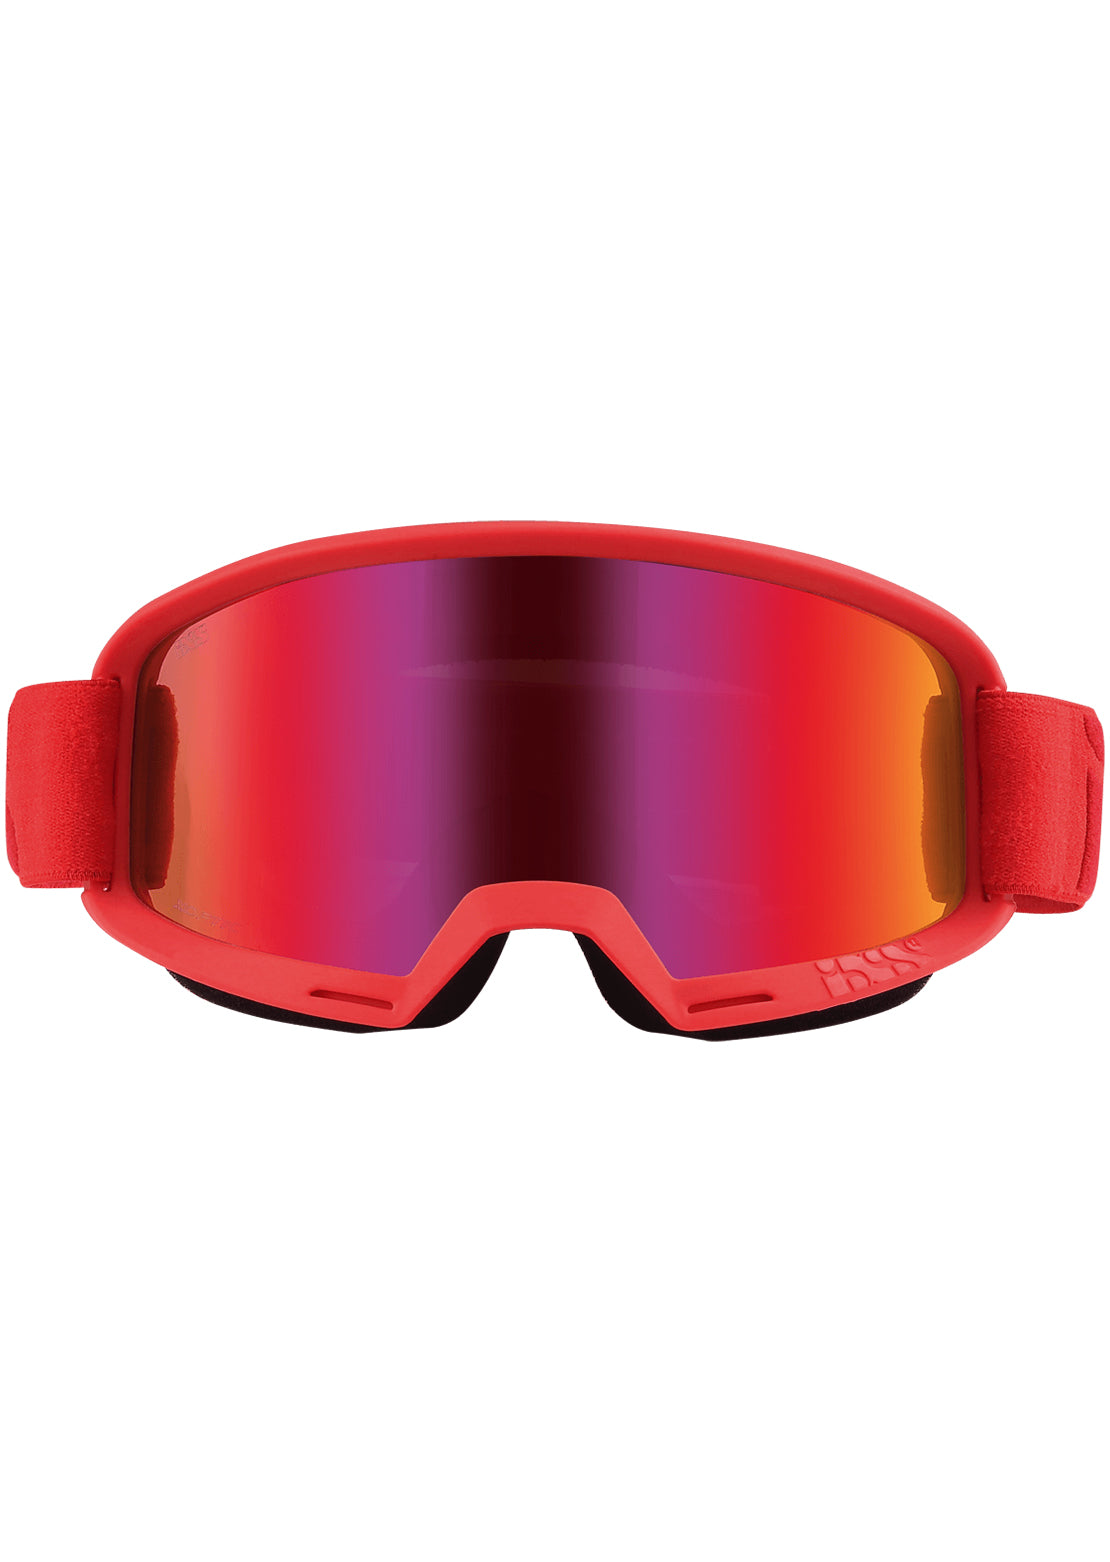 IXS Hack Goggle Red/Mirror Red